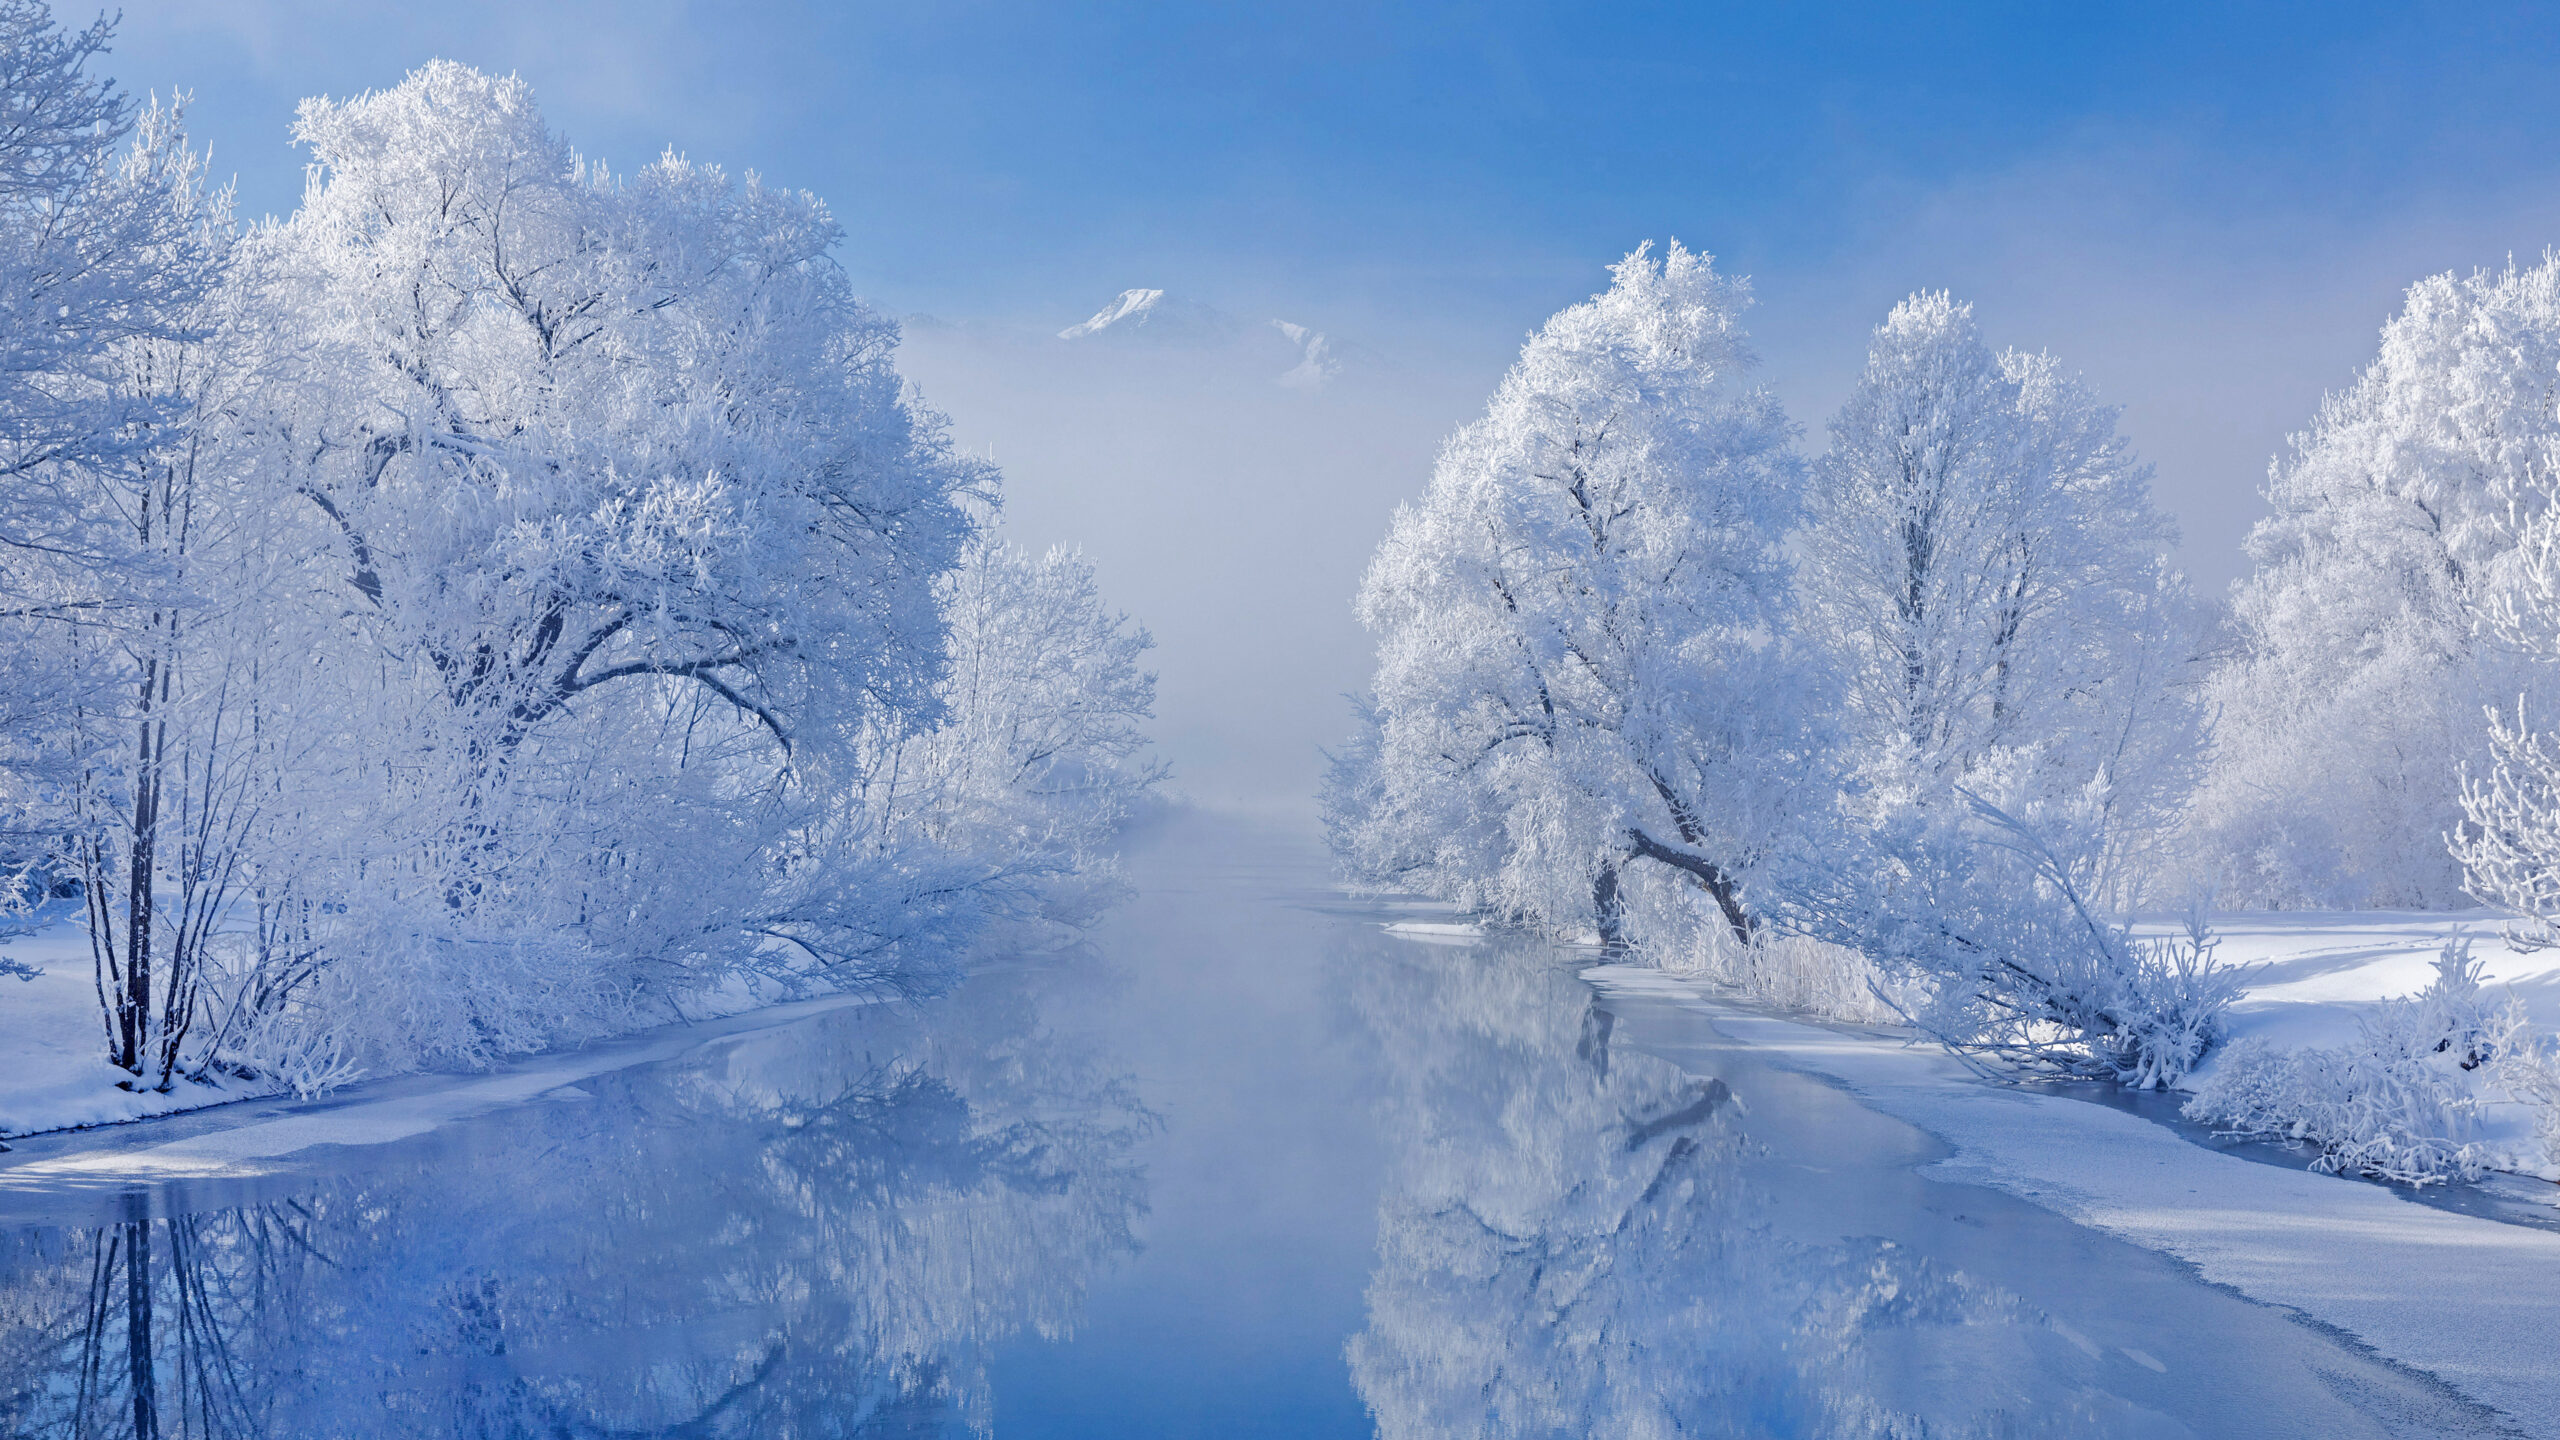 River Between Snow Covered Trees Under Blue Sky Reflection On Water K K HD Winter